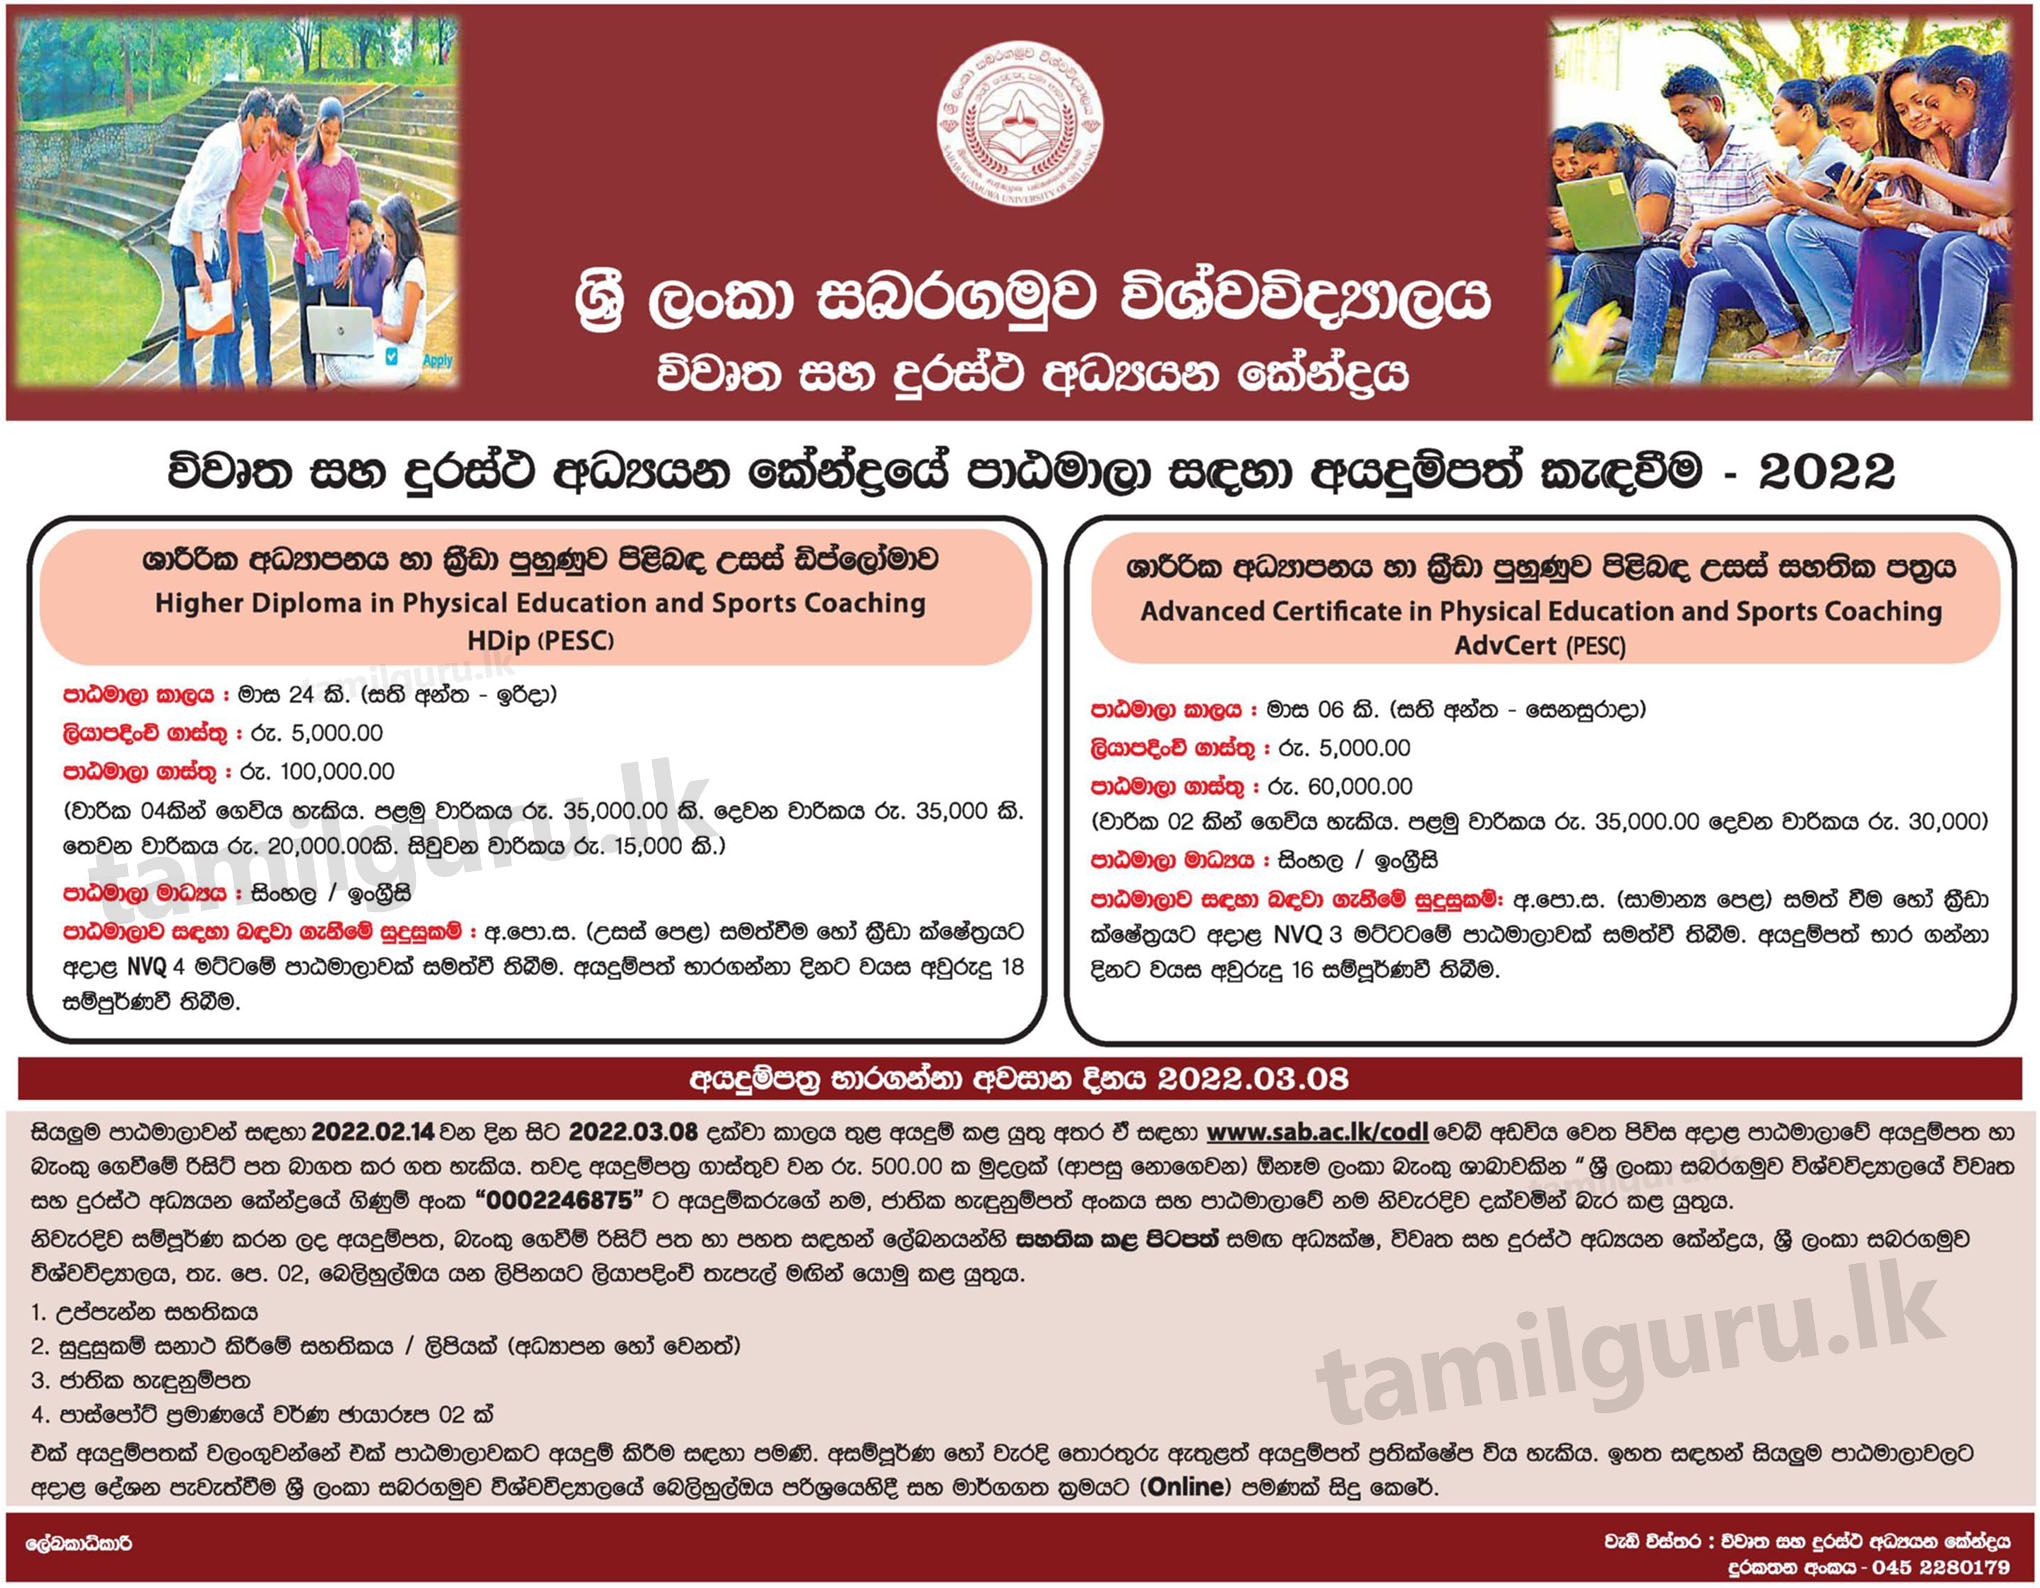 Applications for Higher Diploma / Advanced Certificate in Physical Education & Sports Coaching (PESC) Sabaragamuwa University (CODL) 2022 - Sinhala Notice